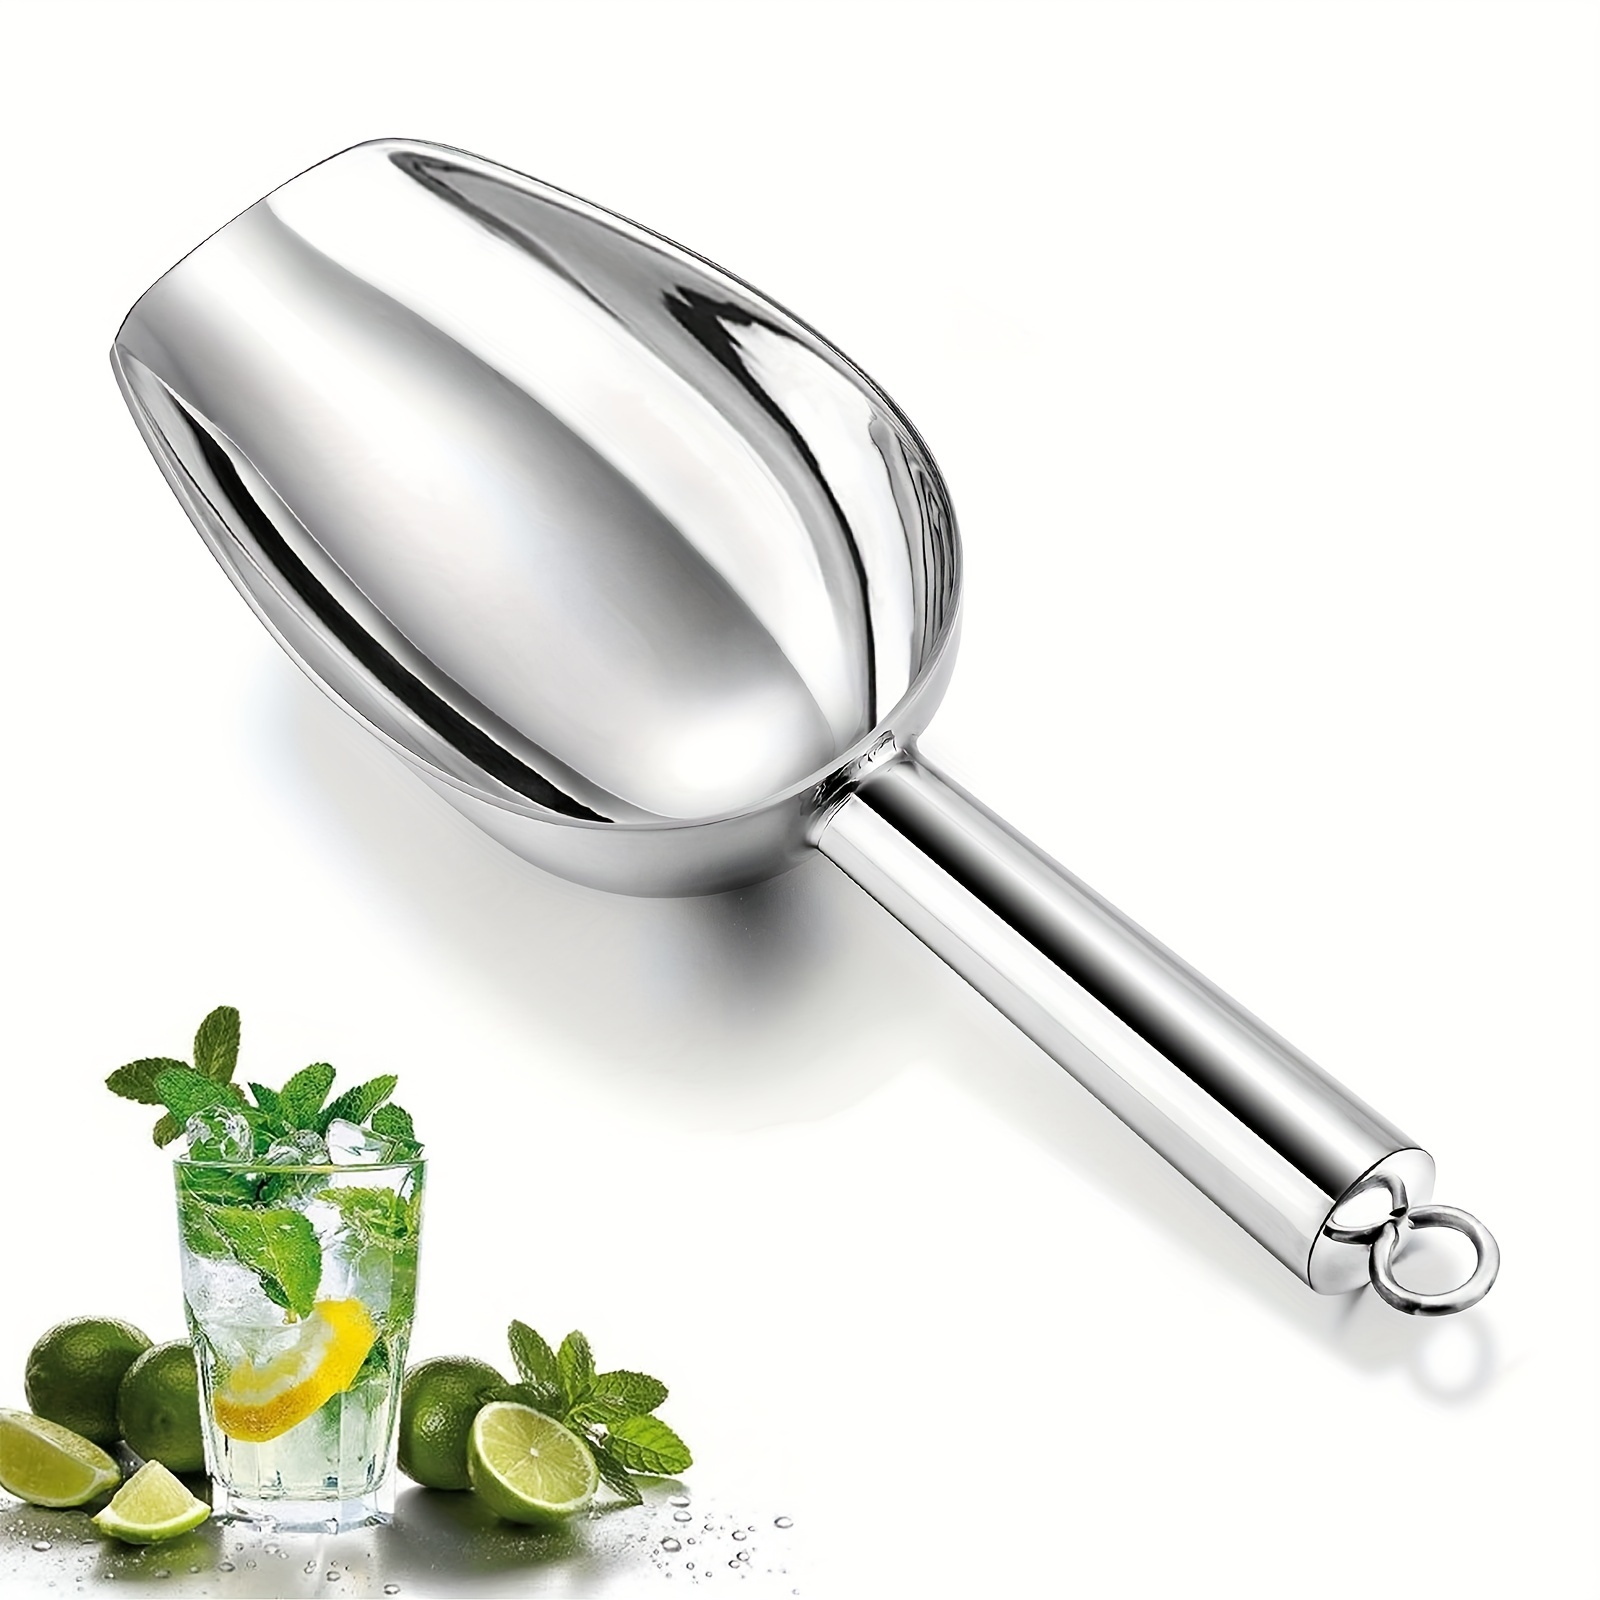 Metal Ice Scoop 3 Oz, Small Stainless Steel Ice scooper for Ice Maker Ice  Bucket Kitchen Freezer Bar Party Wedding, Multipurpose for Popcorn